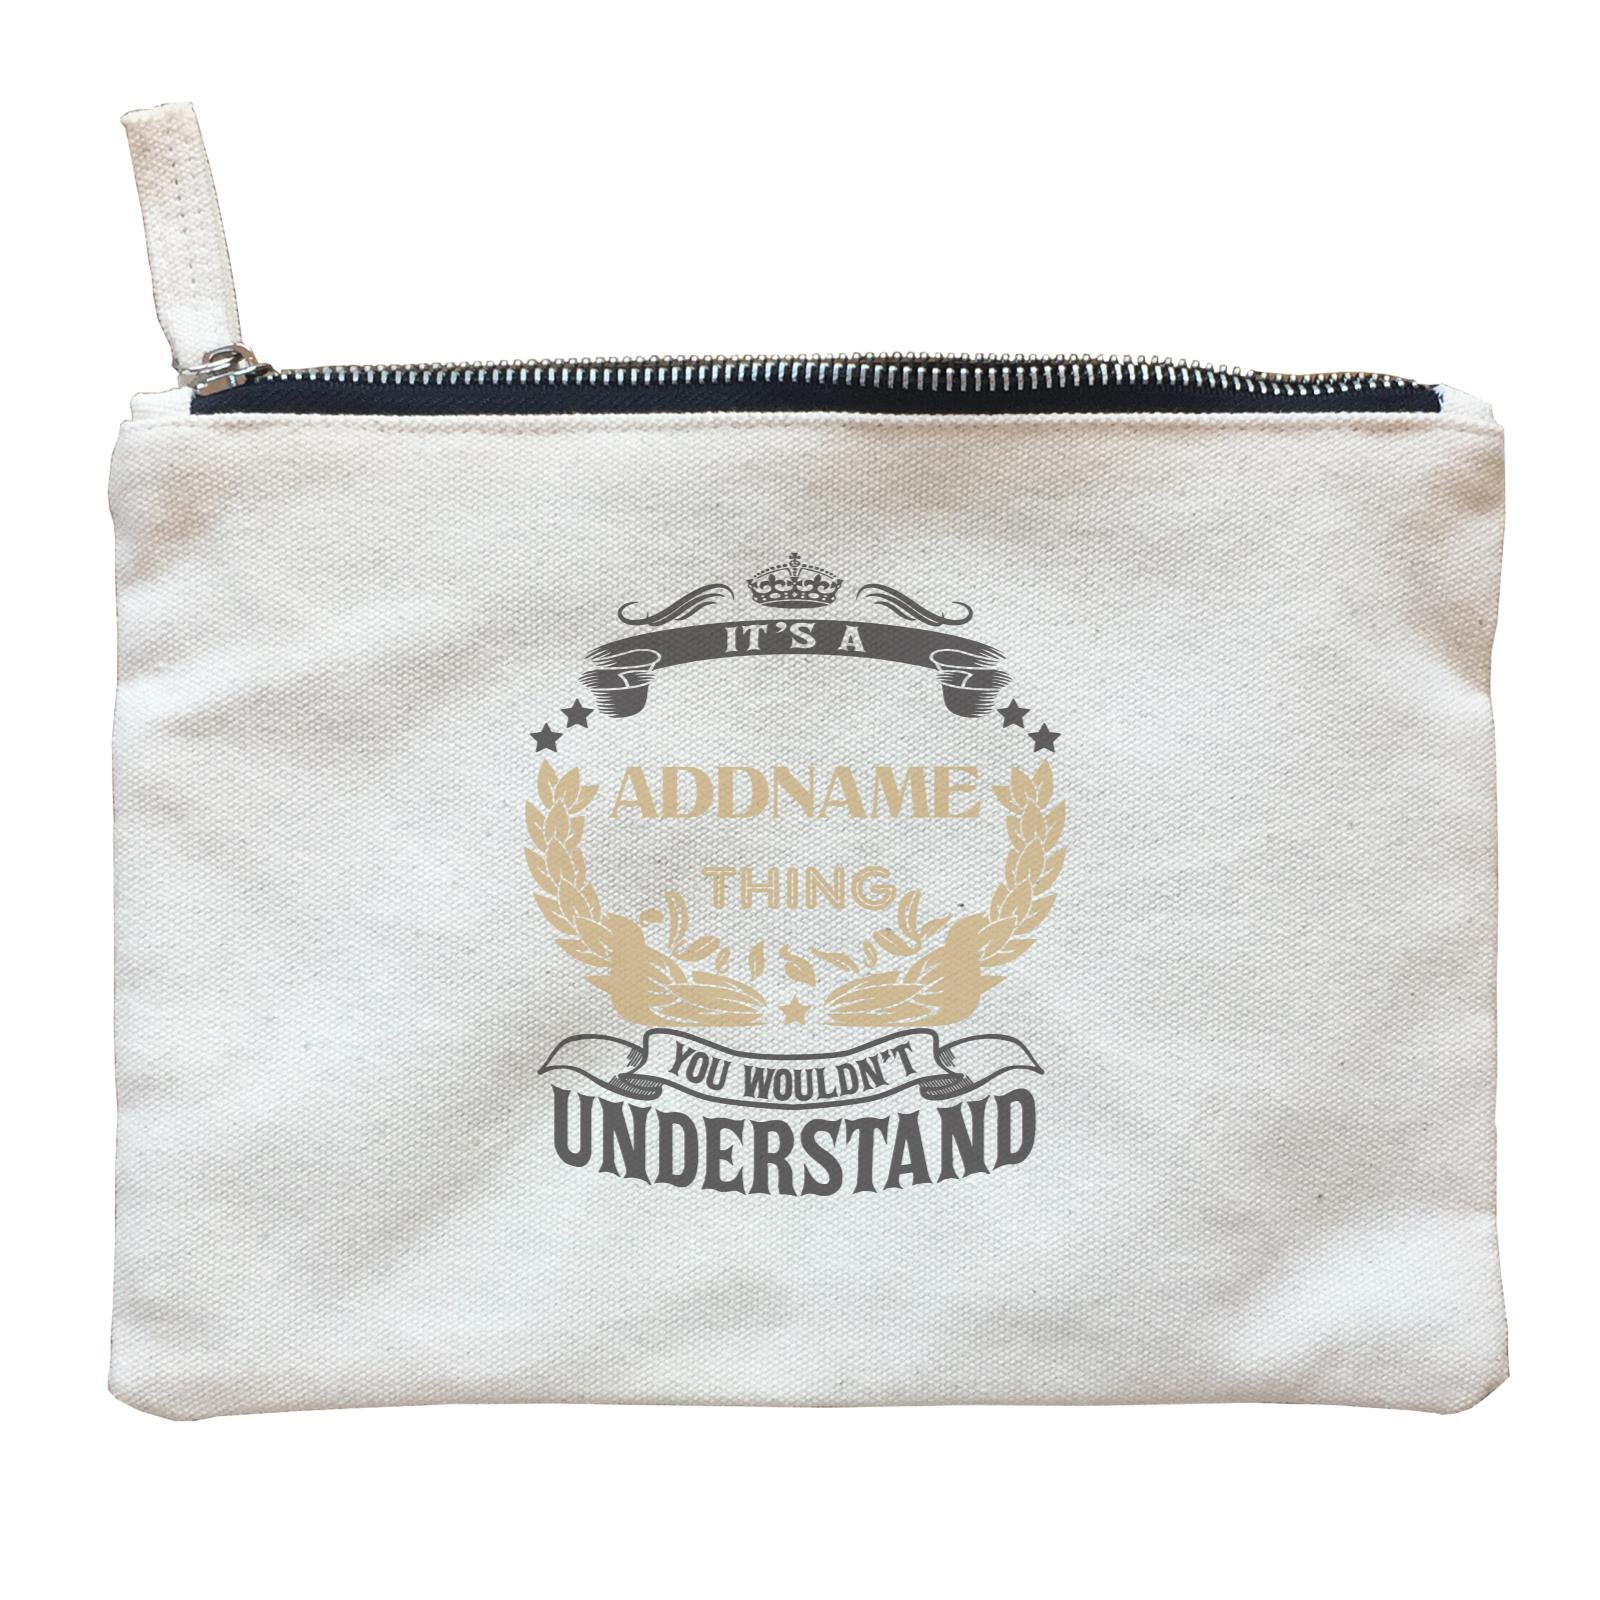 Personalize It Awesome Thing You Wouldn't Understand with Addname Zipper Pouch